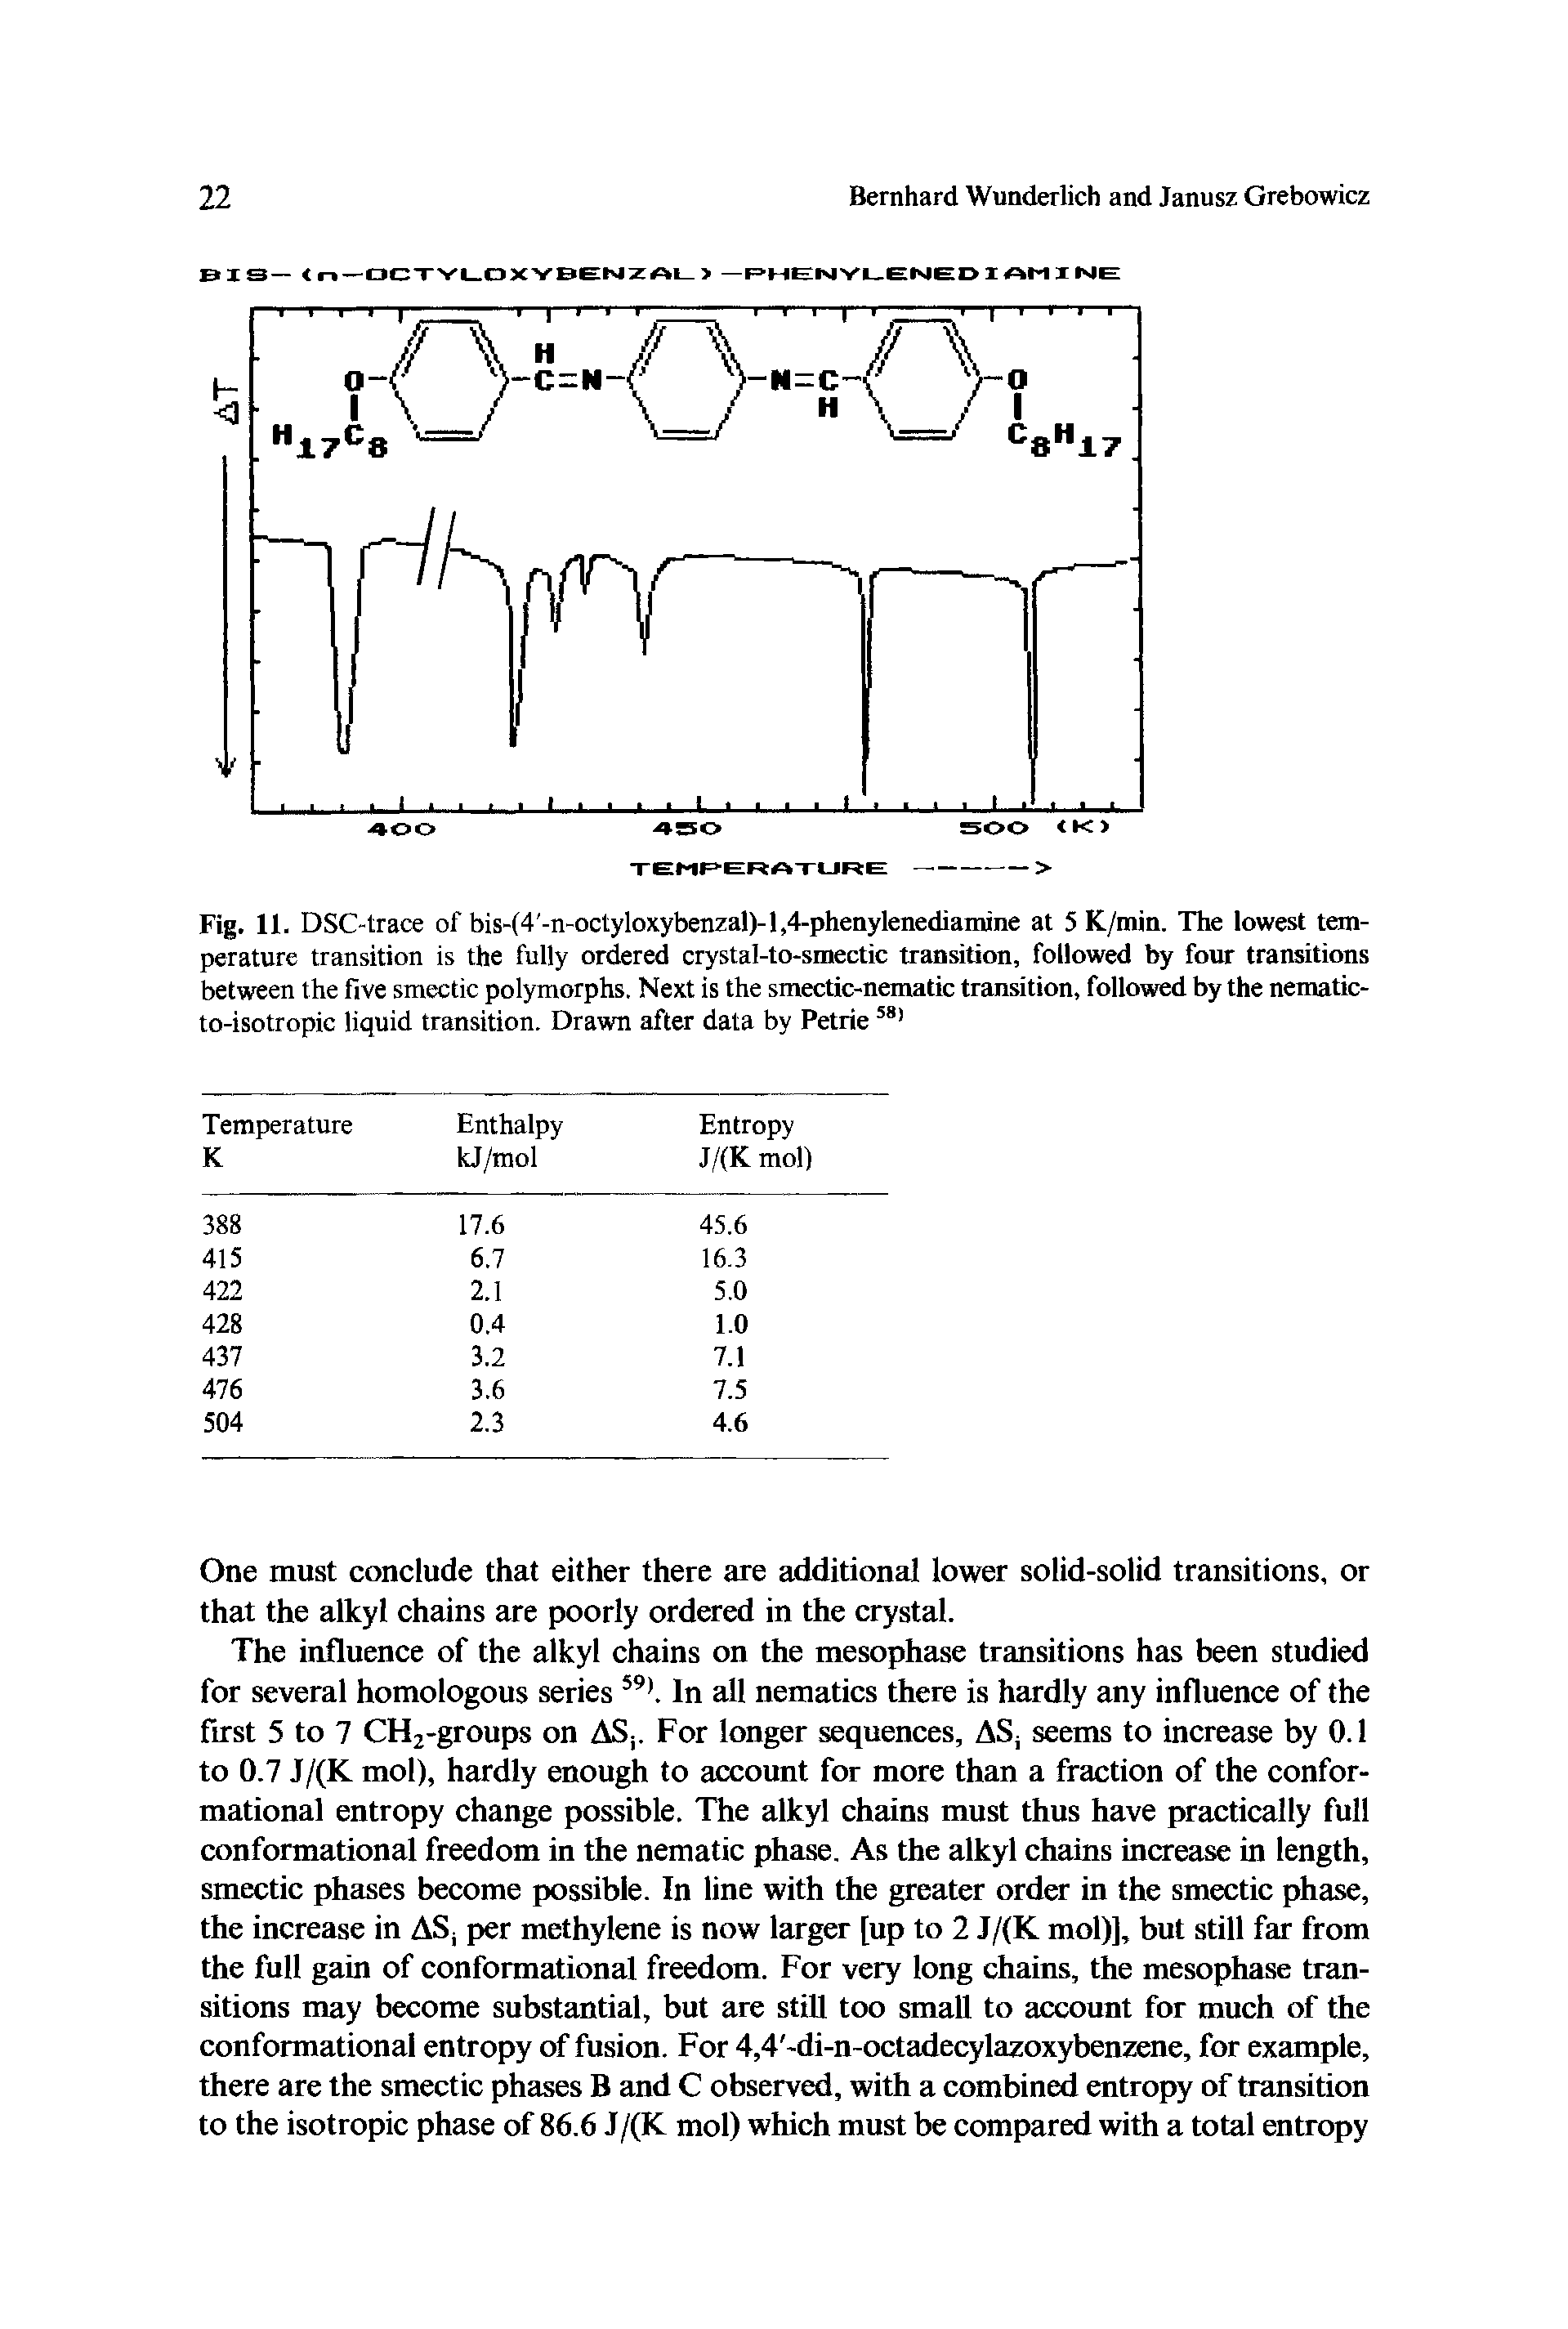 Fig. 11. DSC-trace of bis-(4 -n-octyloxybenzal)-l,4-phenylenediamine at 5 K/min. The lowest temperature transition is the fully ordered crystal-to-smectic transition, followed by four transitions between the five smectic polymorphs. Next is the smectic-nematic transition, followed by the nematic-to-isotropic liquid transition. Drawn after data by Petrie581...